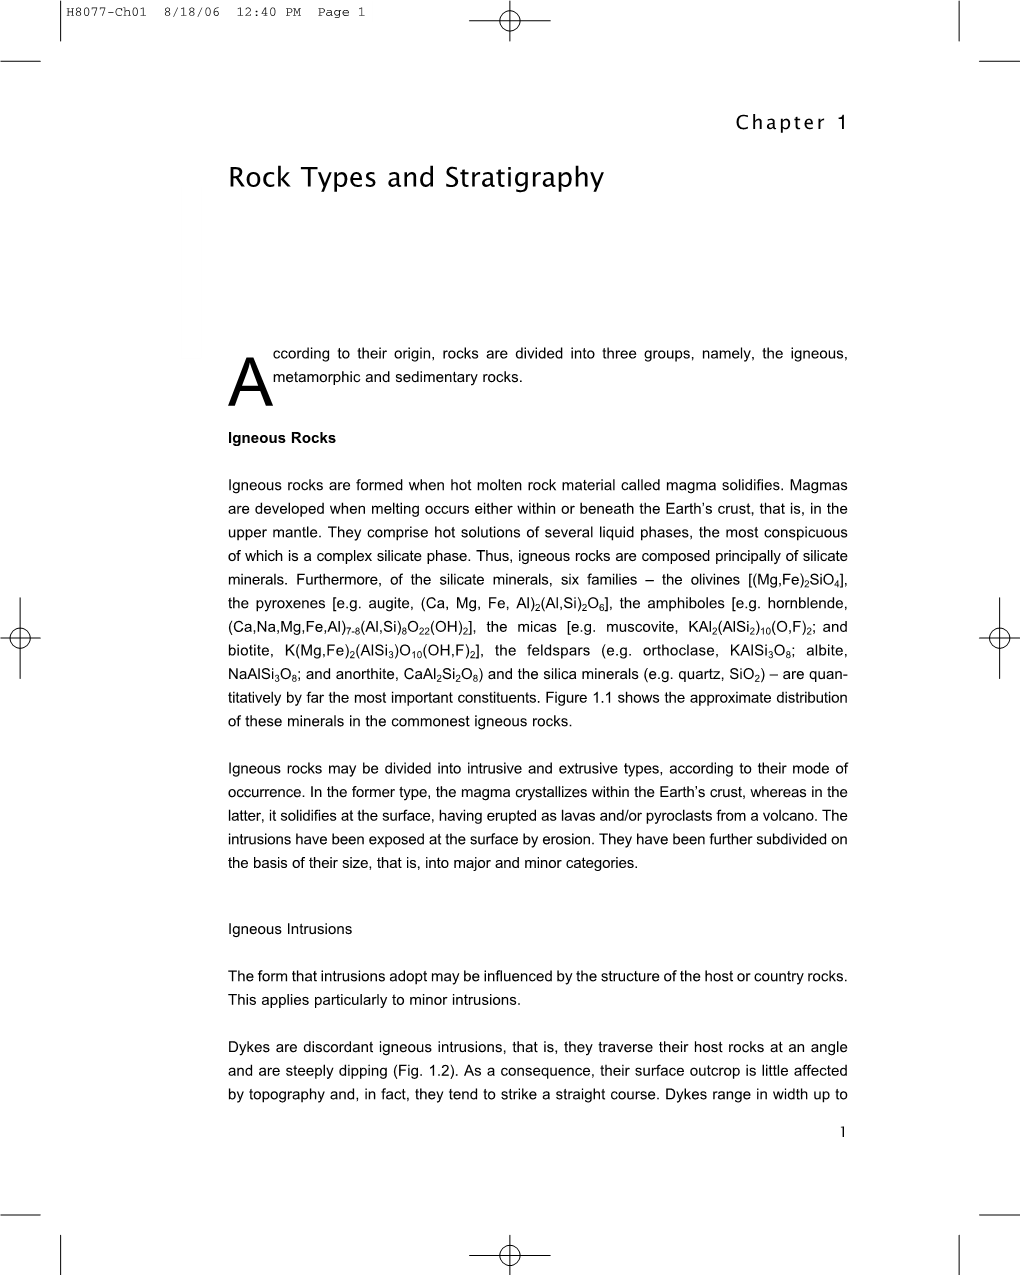 Rock Types and Stratigraphy